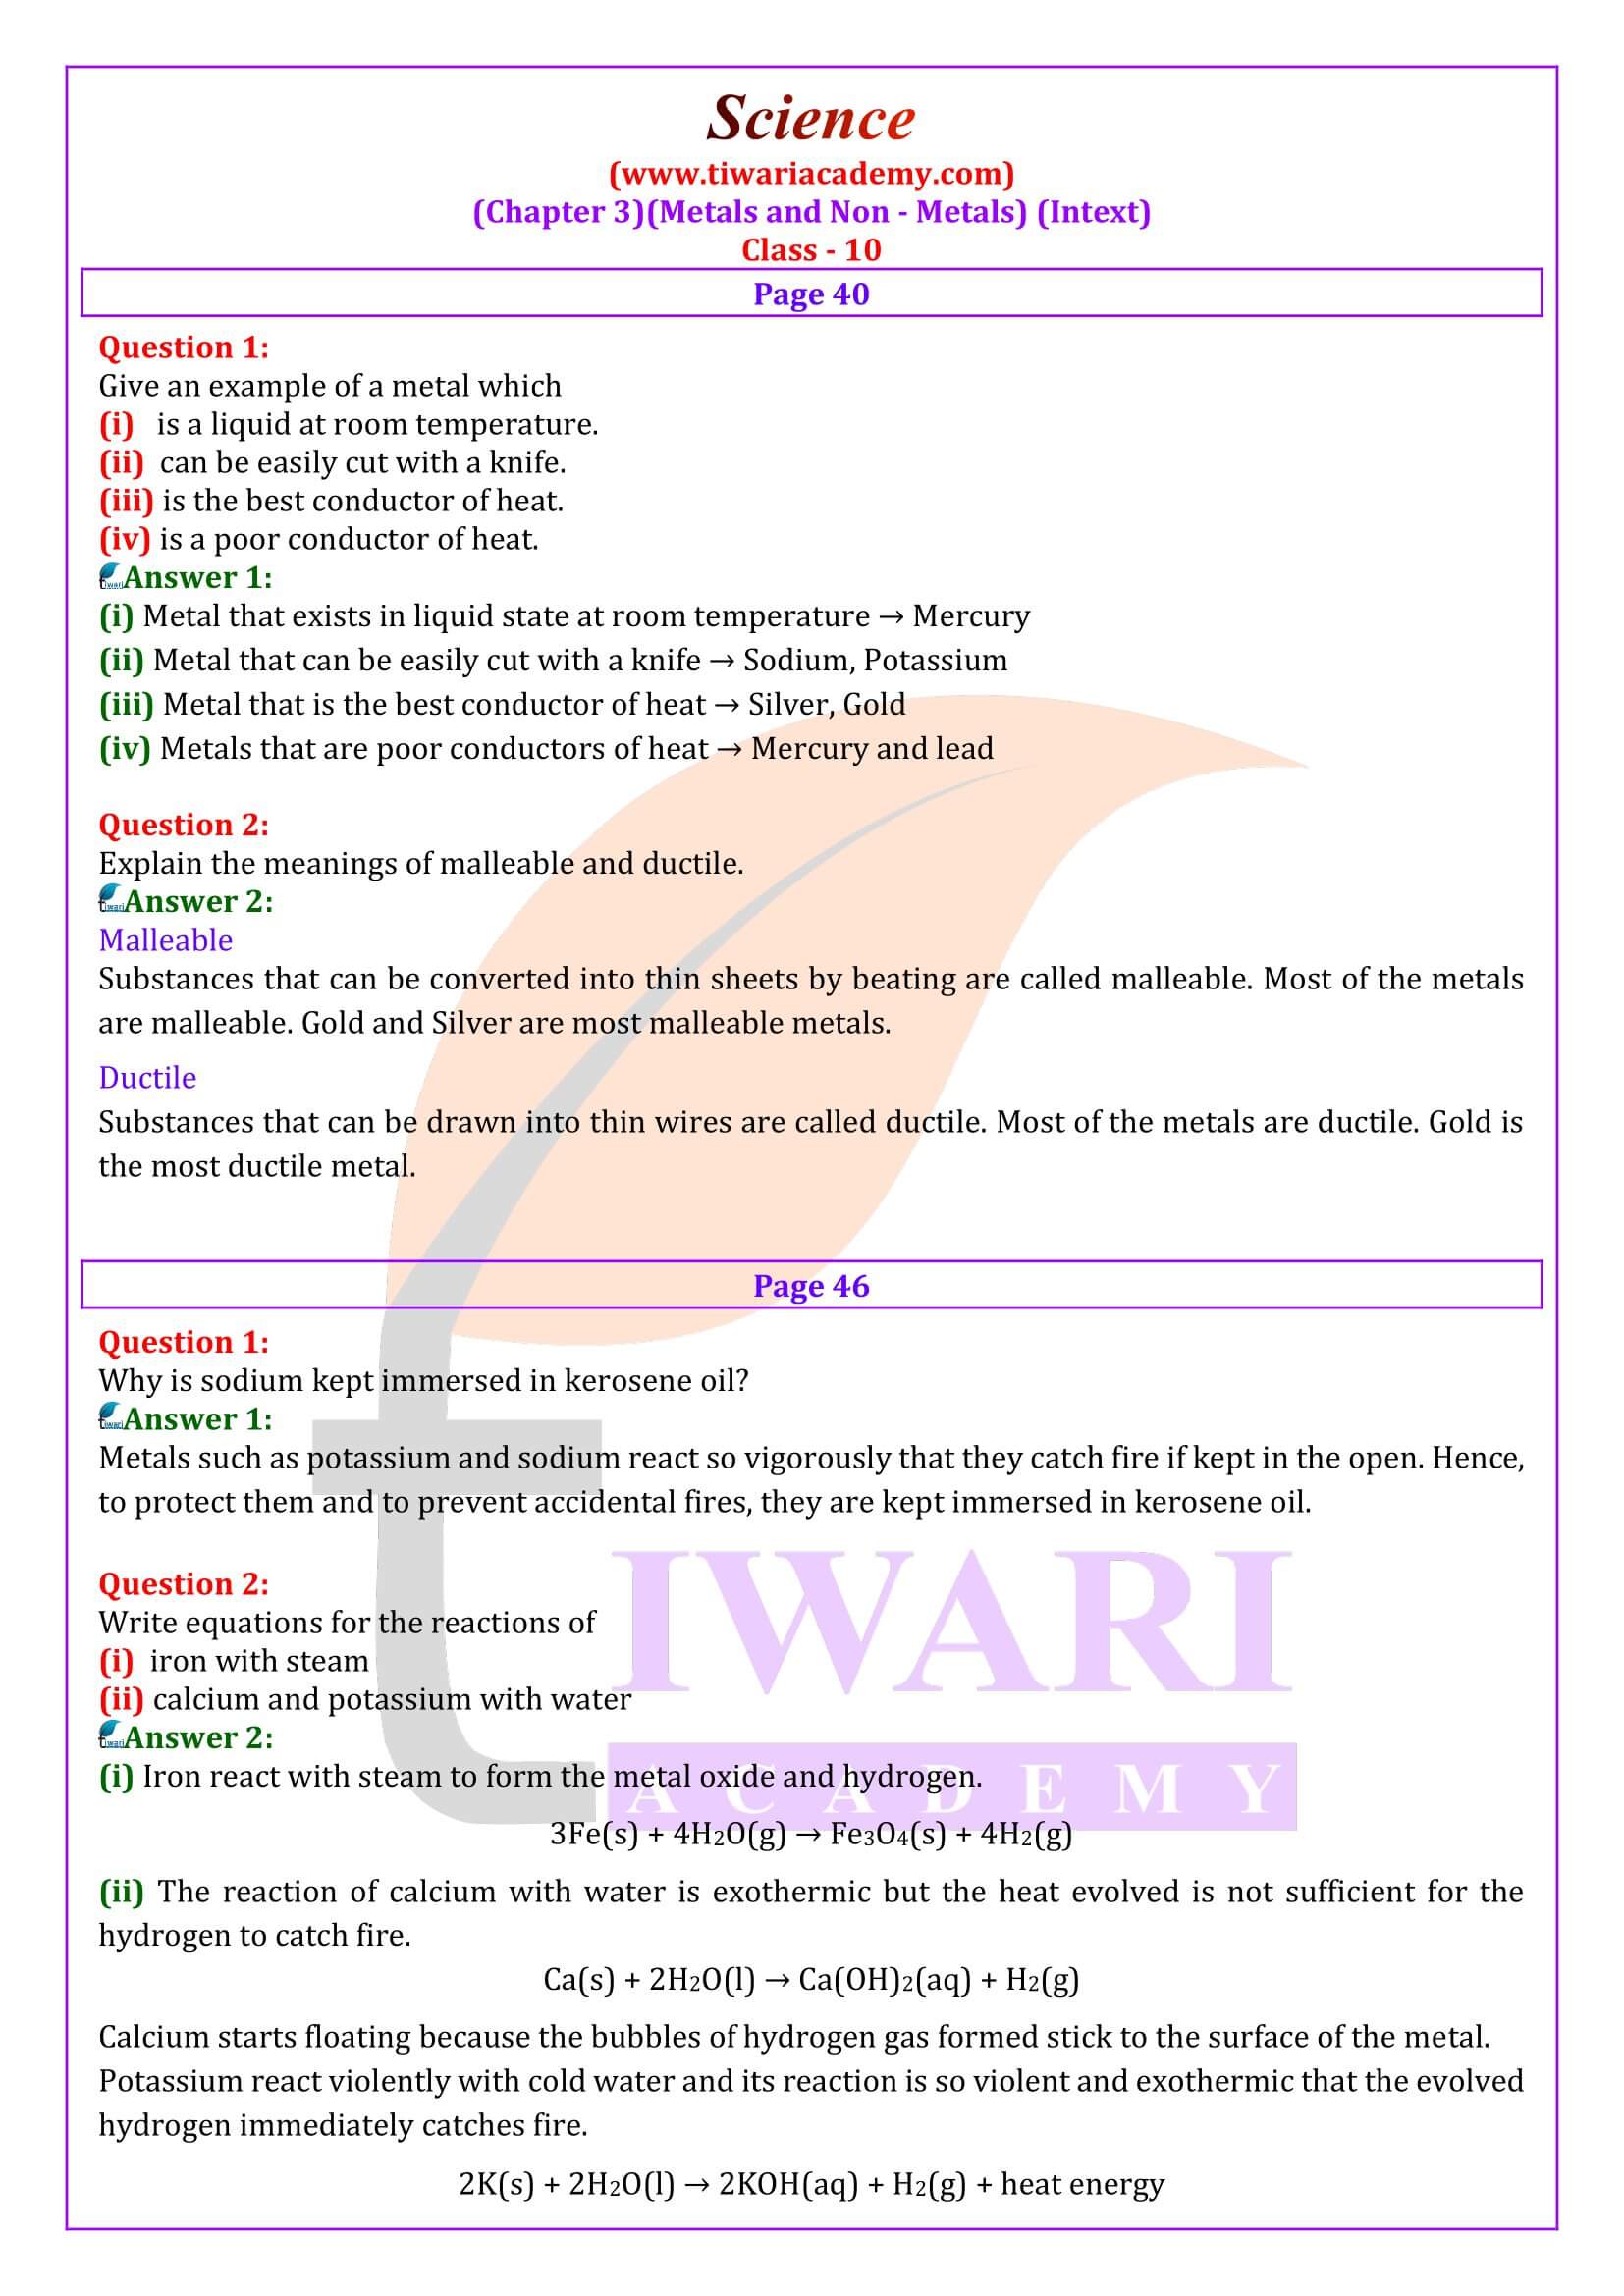 NCERT Solutions for Class 10 Science Chapter 3 Intext Answers